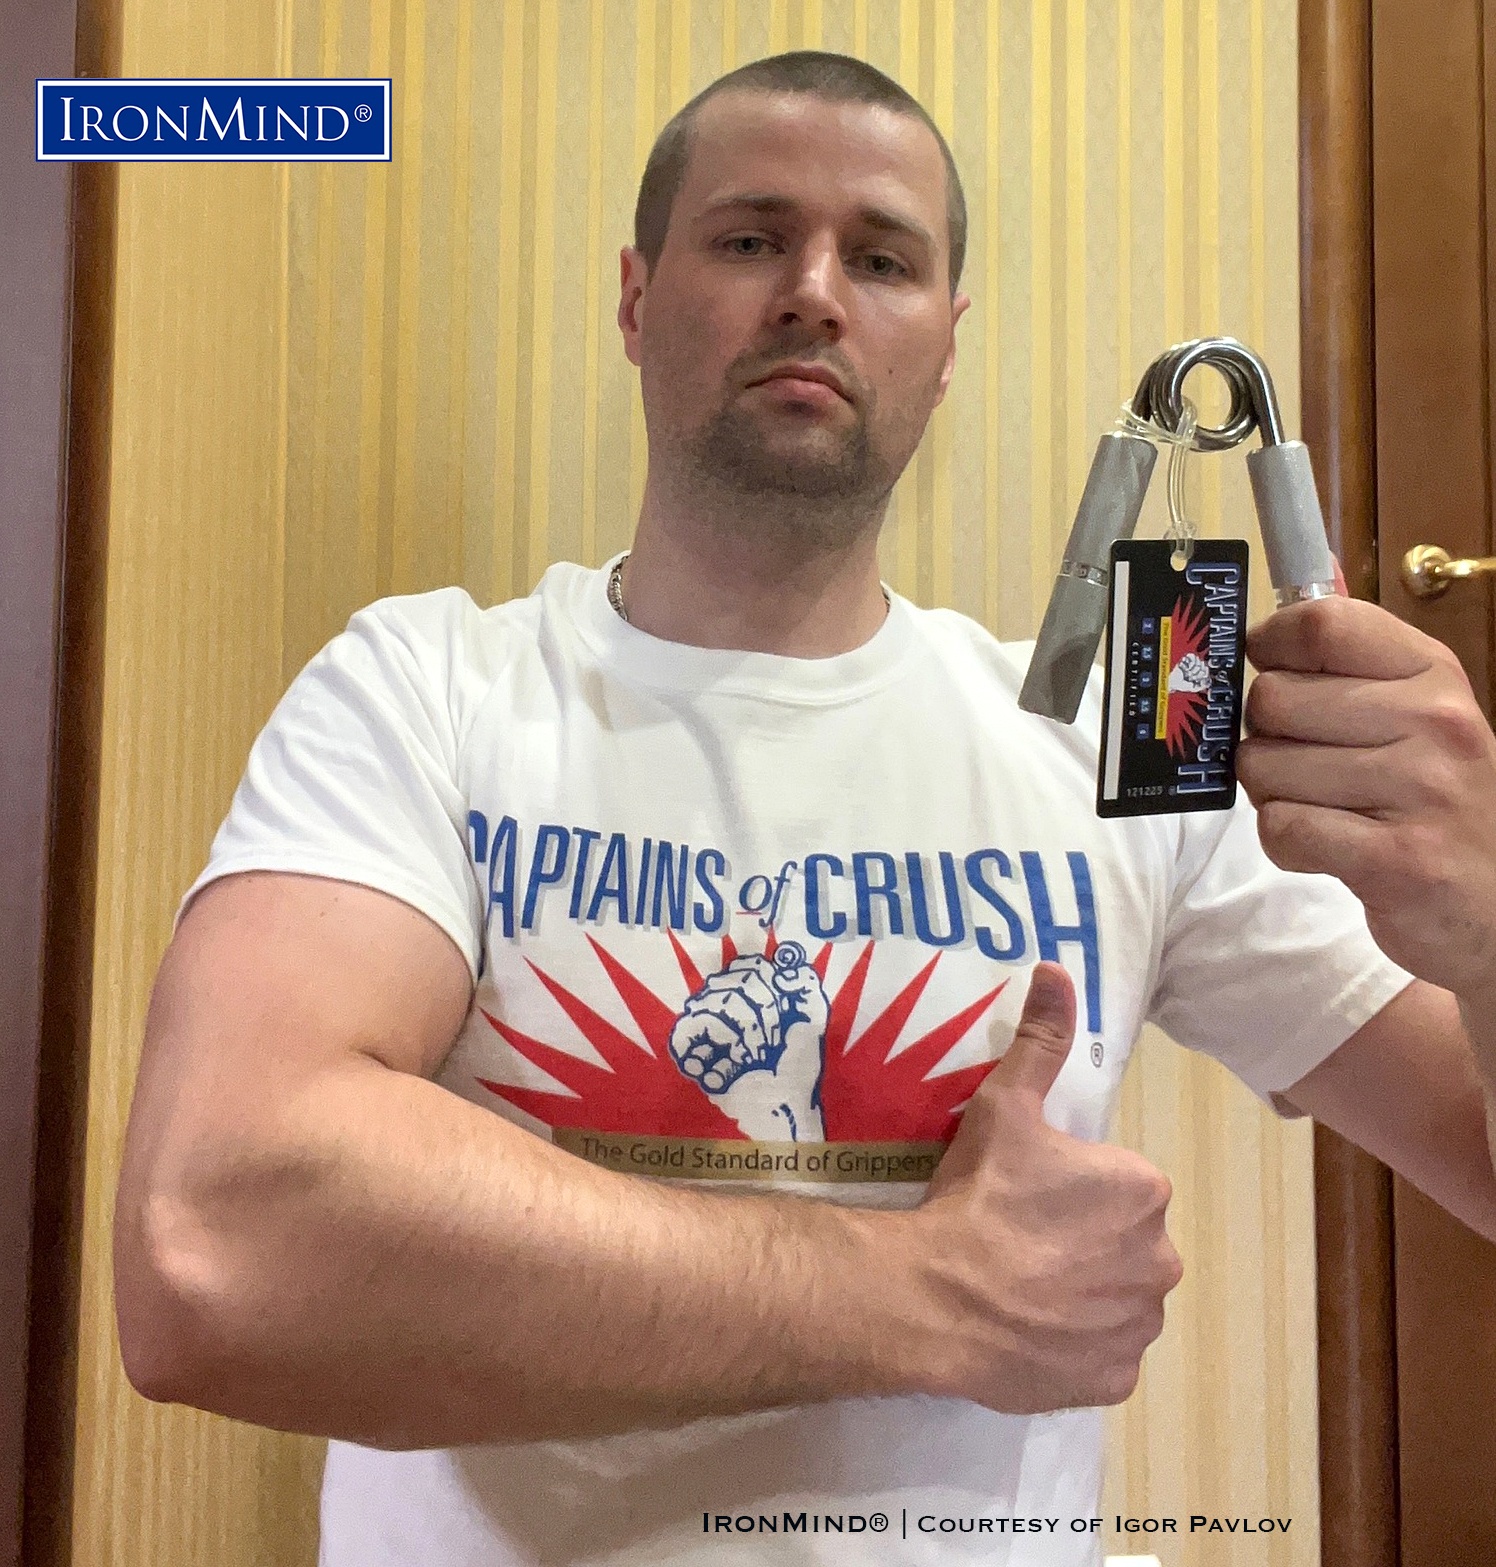 Igor Pavlov bounced back from a close miss when he first tried to certify on the Captains of Crush No. 3 gripper to show his utter and complete command in his rematch—making his certification official. IronMind® | Photo courtesy of Igor Pavlov